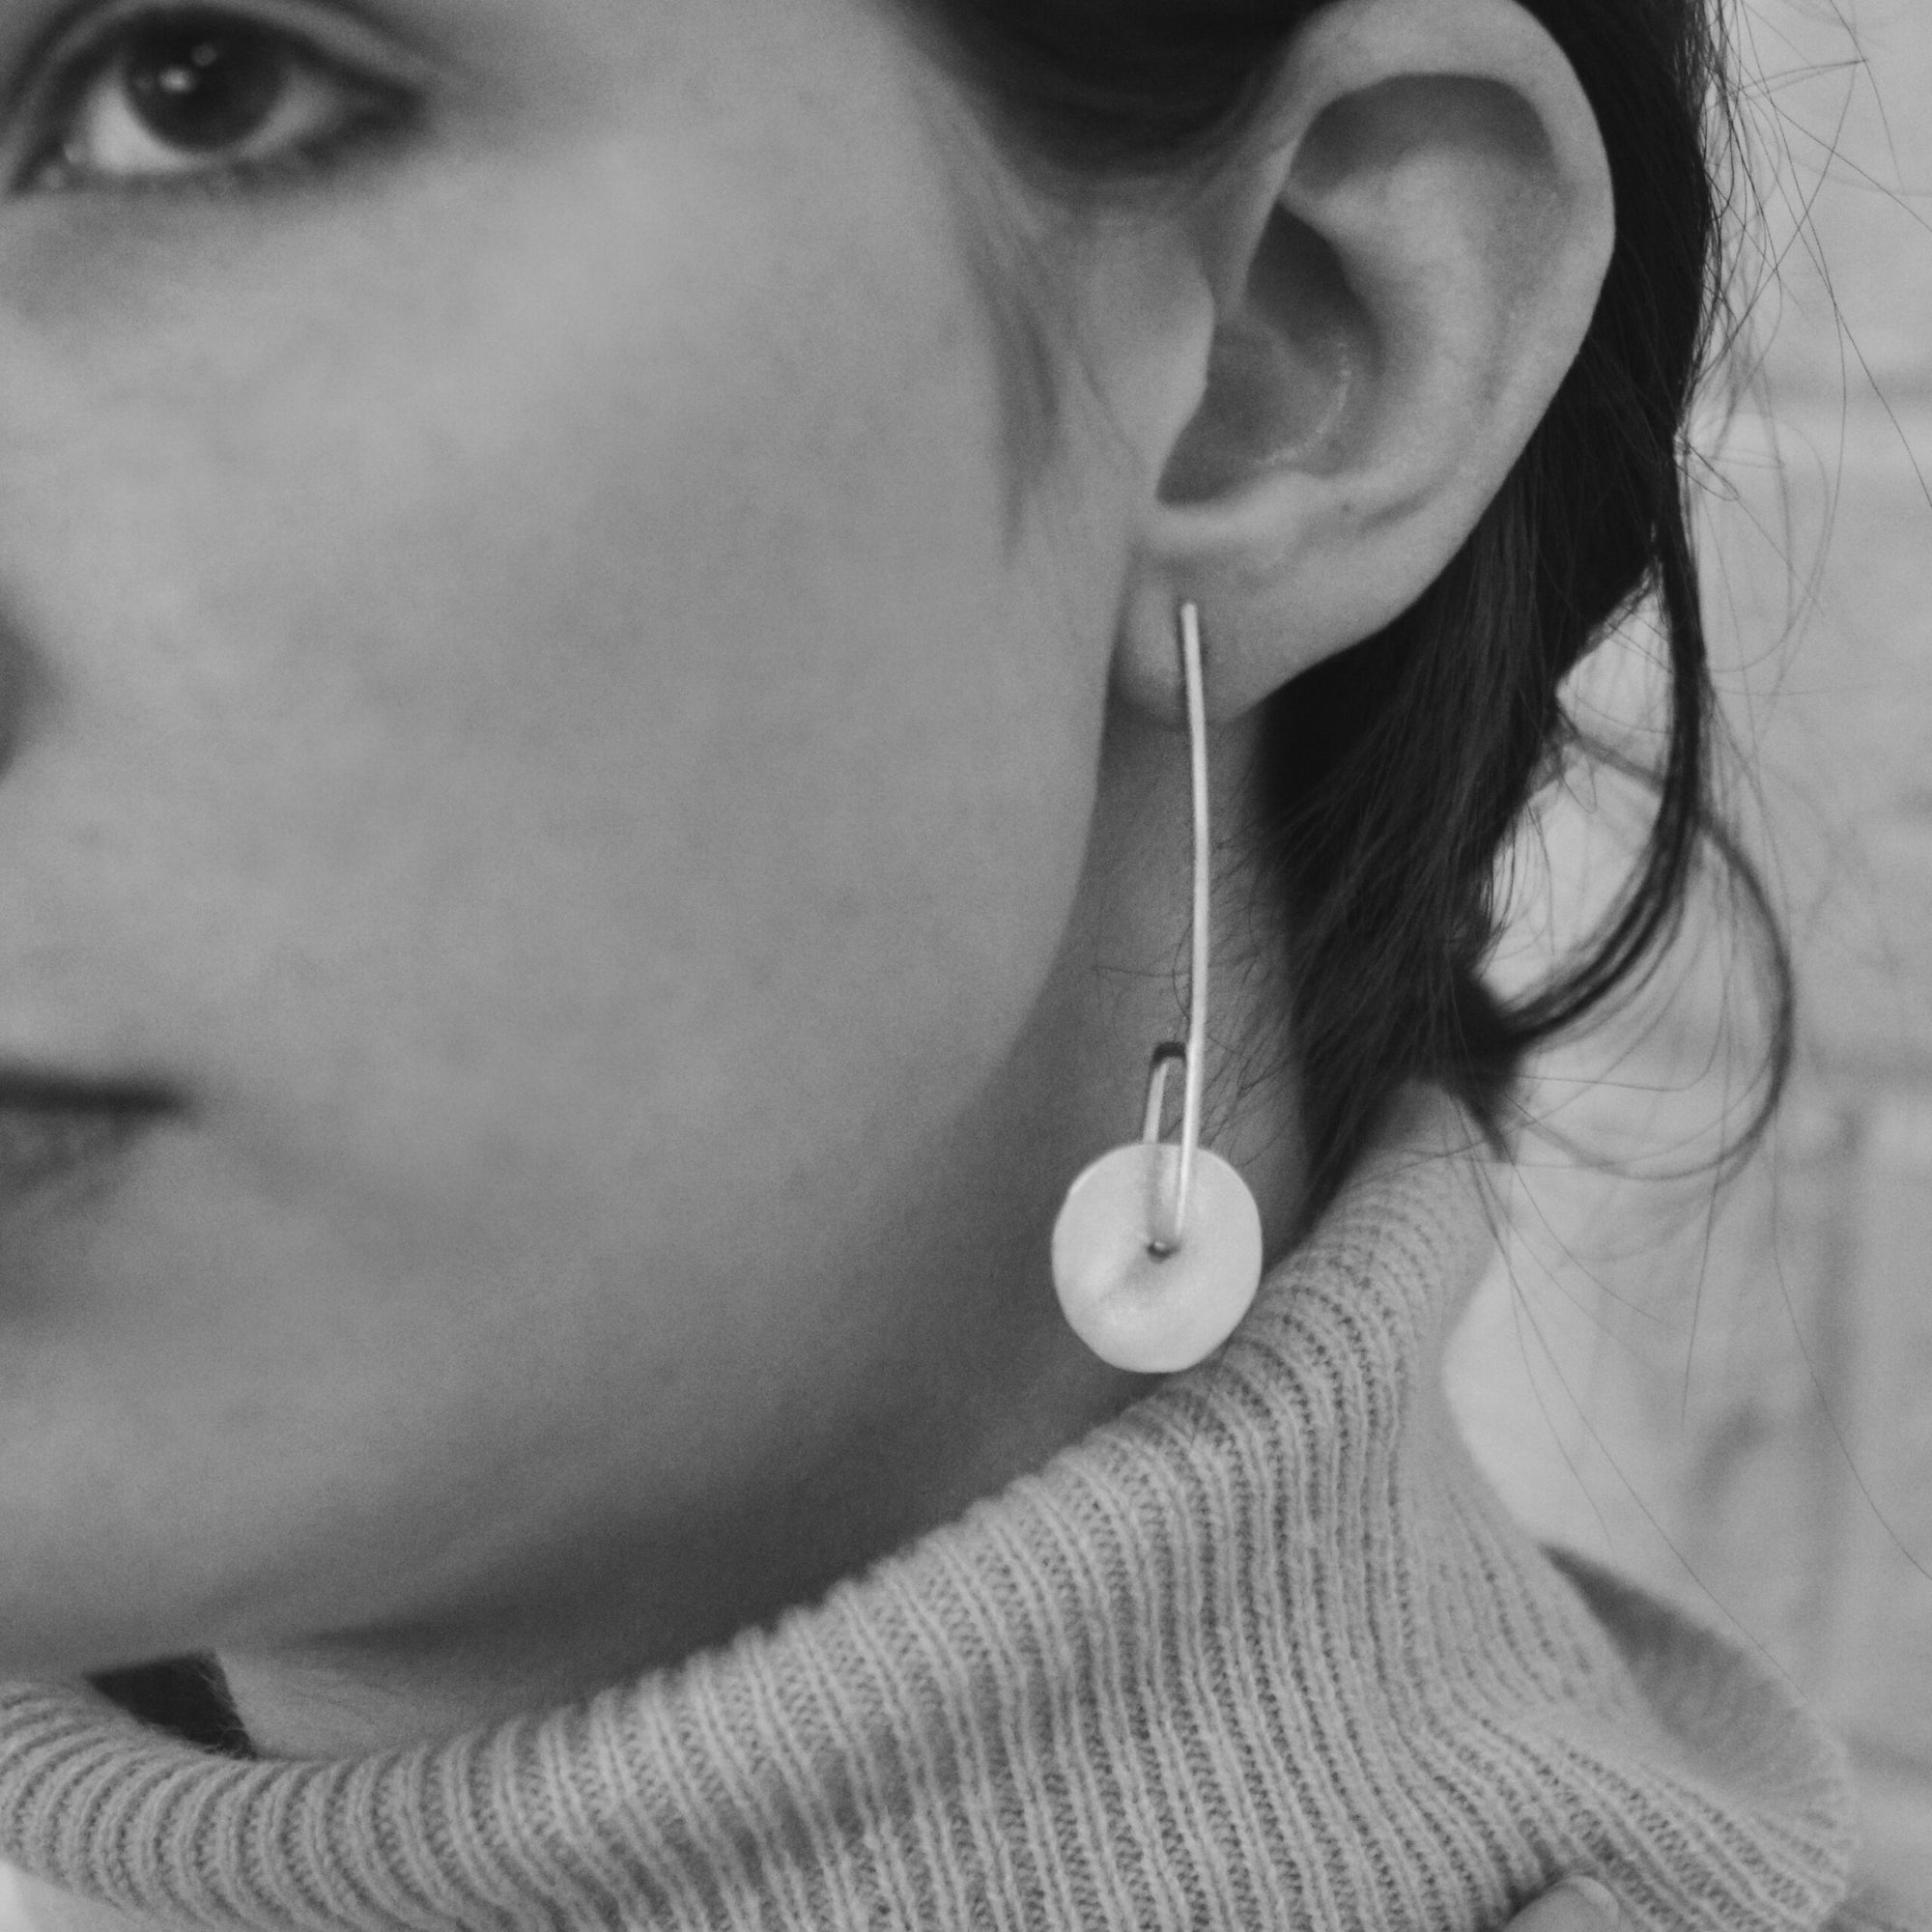 Image shows long twirling disc earrings on a model for scale.